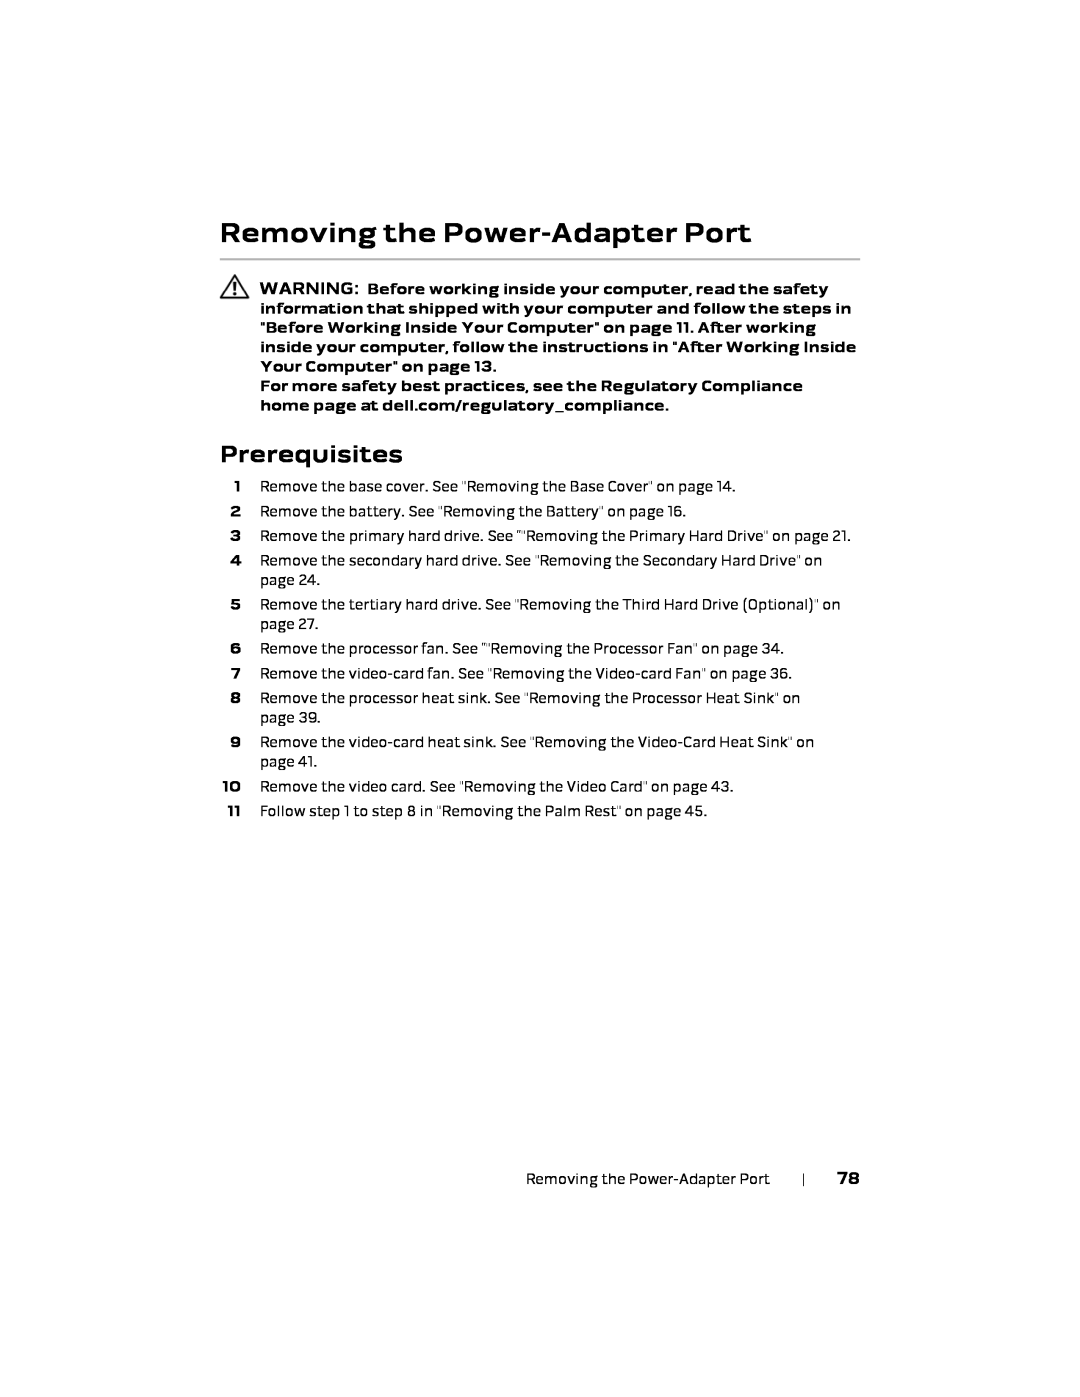 Alienware P18E, 17 R1 owner manual Removing the Power-Adapter Port, Prerequisites 